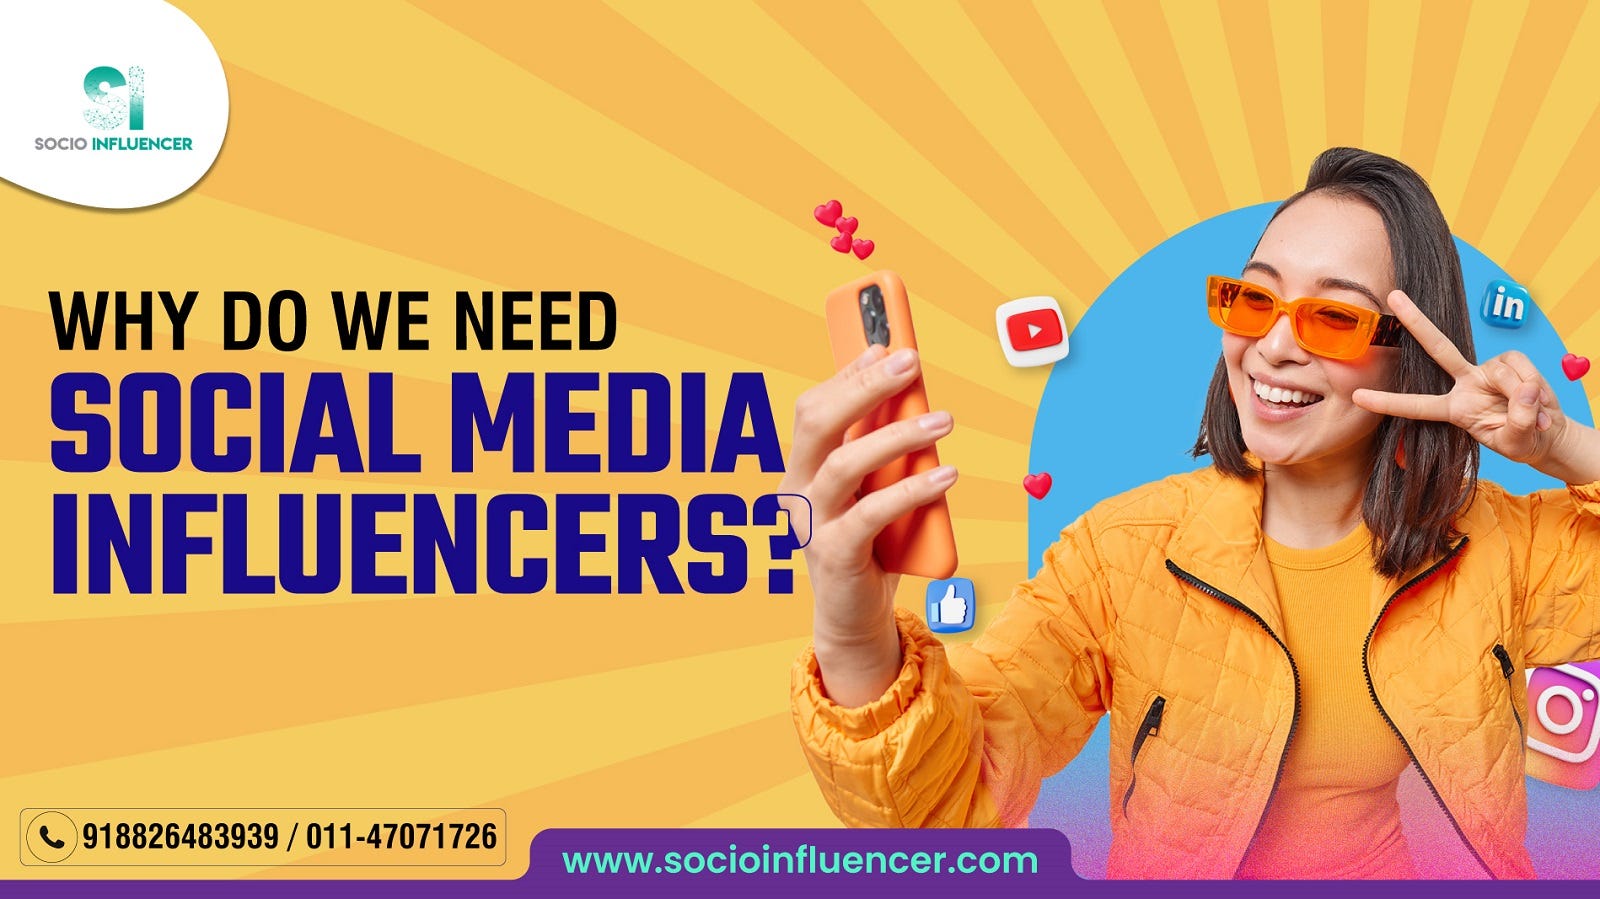 How Can Social Media Influencers Help Us?